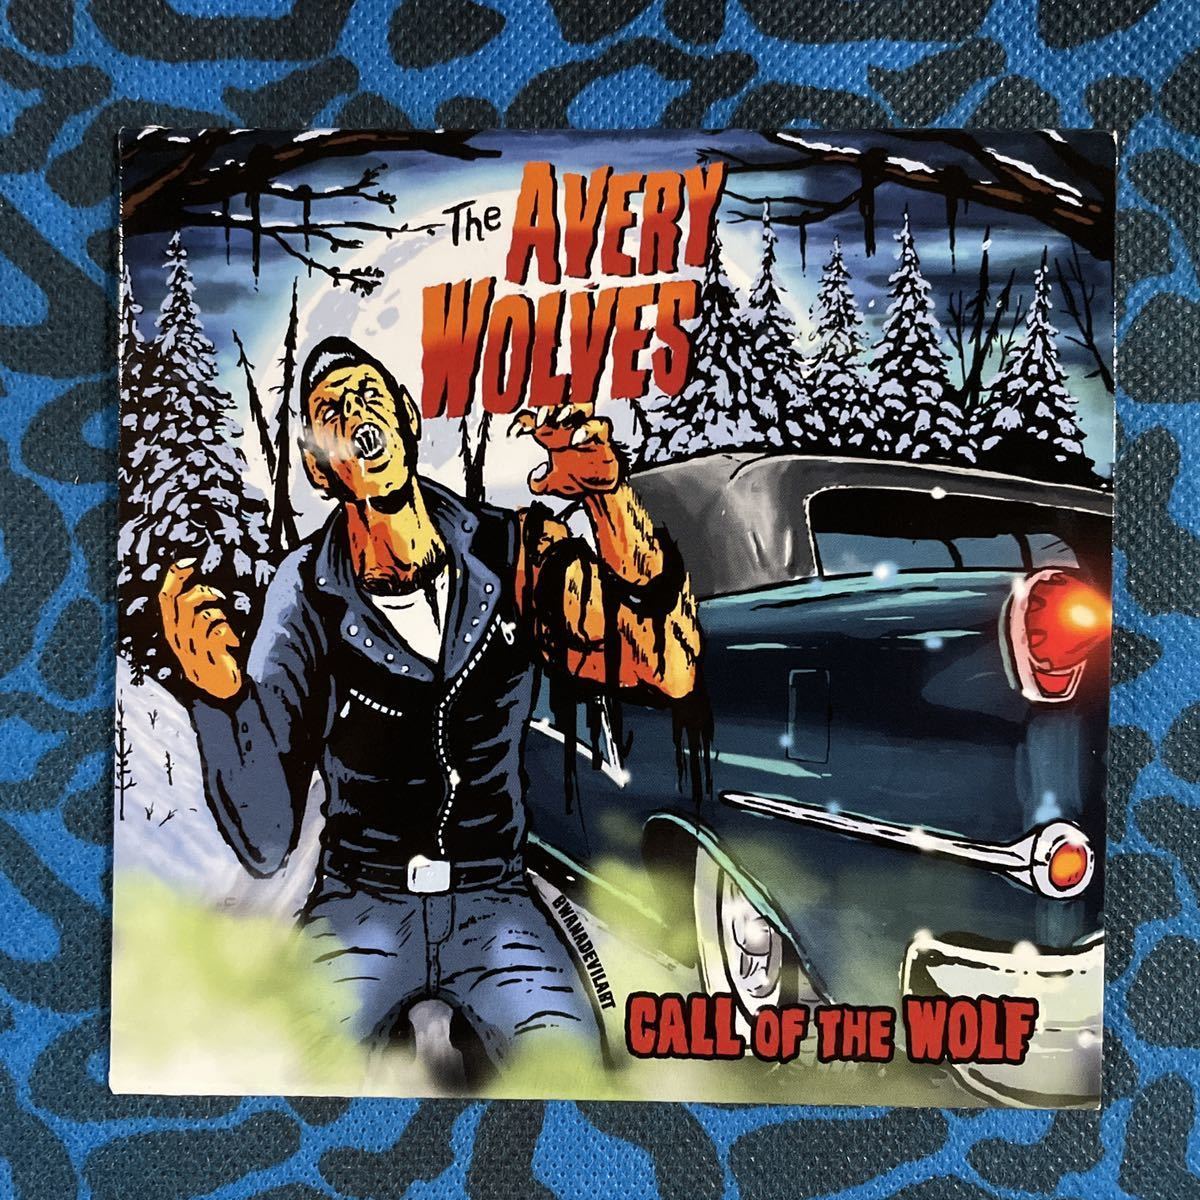 THE AVERY WOLVES アルバムCALL OF THE WOLF CD新品サイコビリーネオロカビリーロカビリーパンク　ロックンロール_画像2